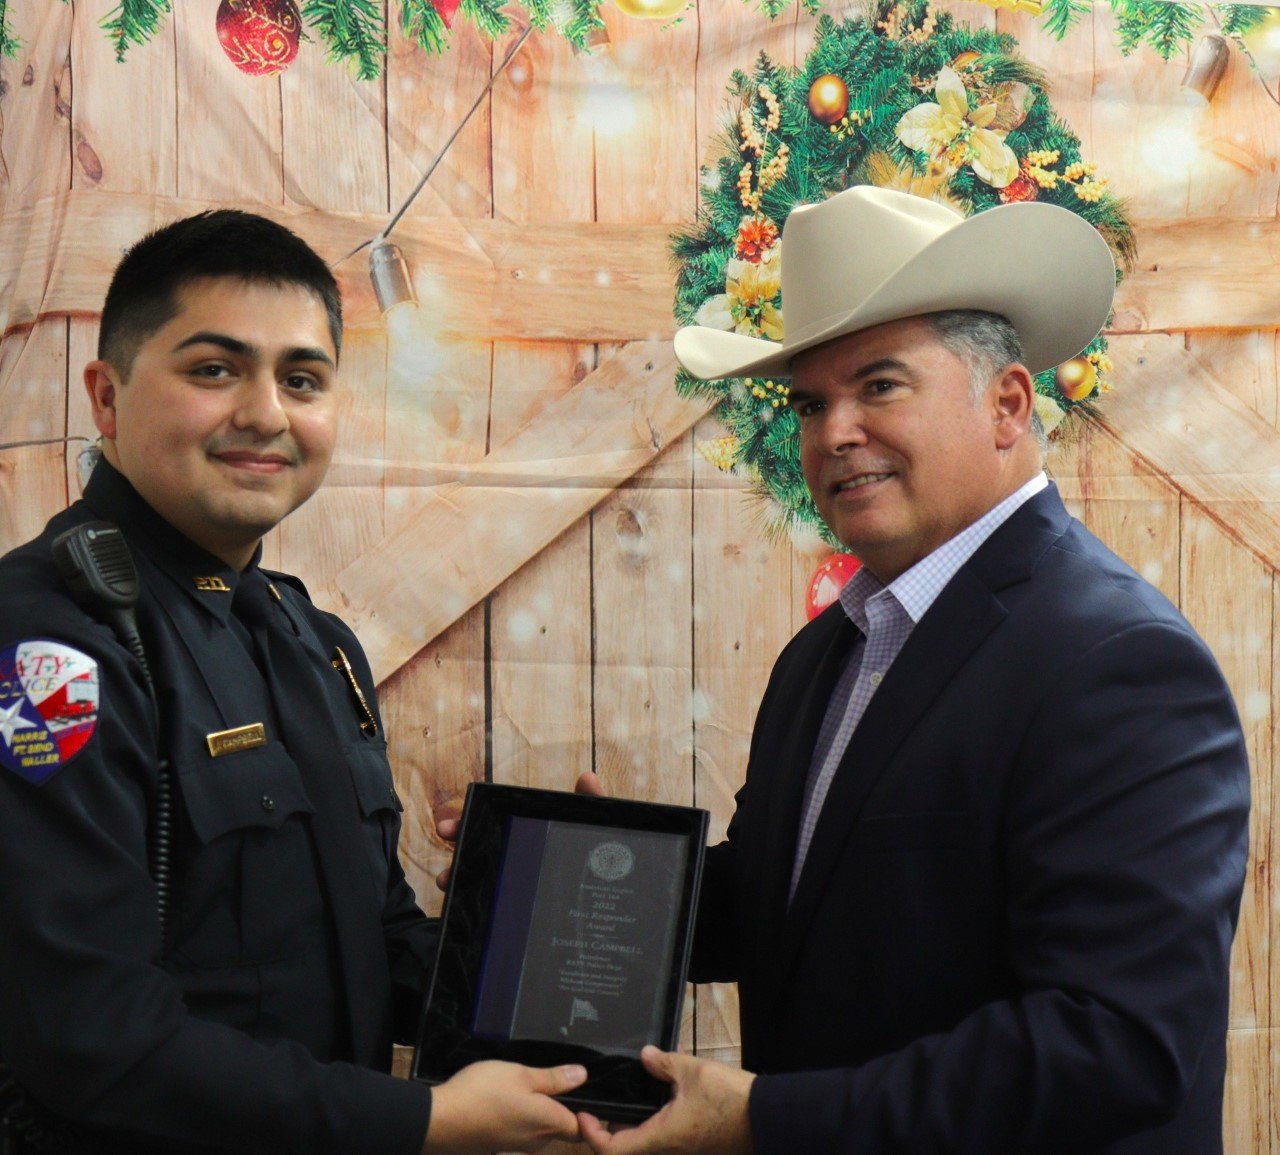 Katy Police officer Joseph Campbell receives congratulations from Police Chief Noe Diaz at the American Legion Post 164 First Responders Dinner, held Dec. 10 at the Elks Lodge, 1050 Katy Fort Bend Road.